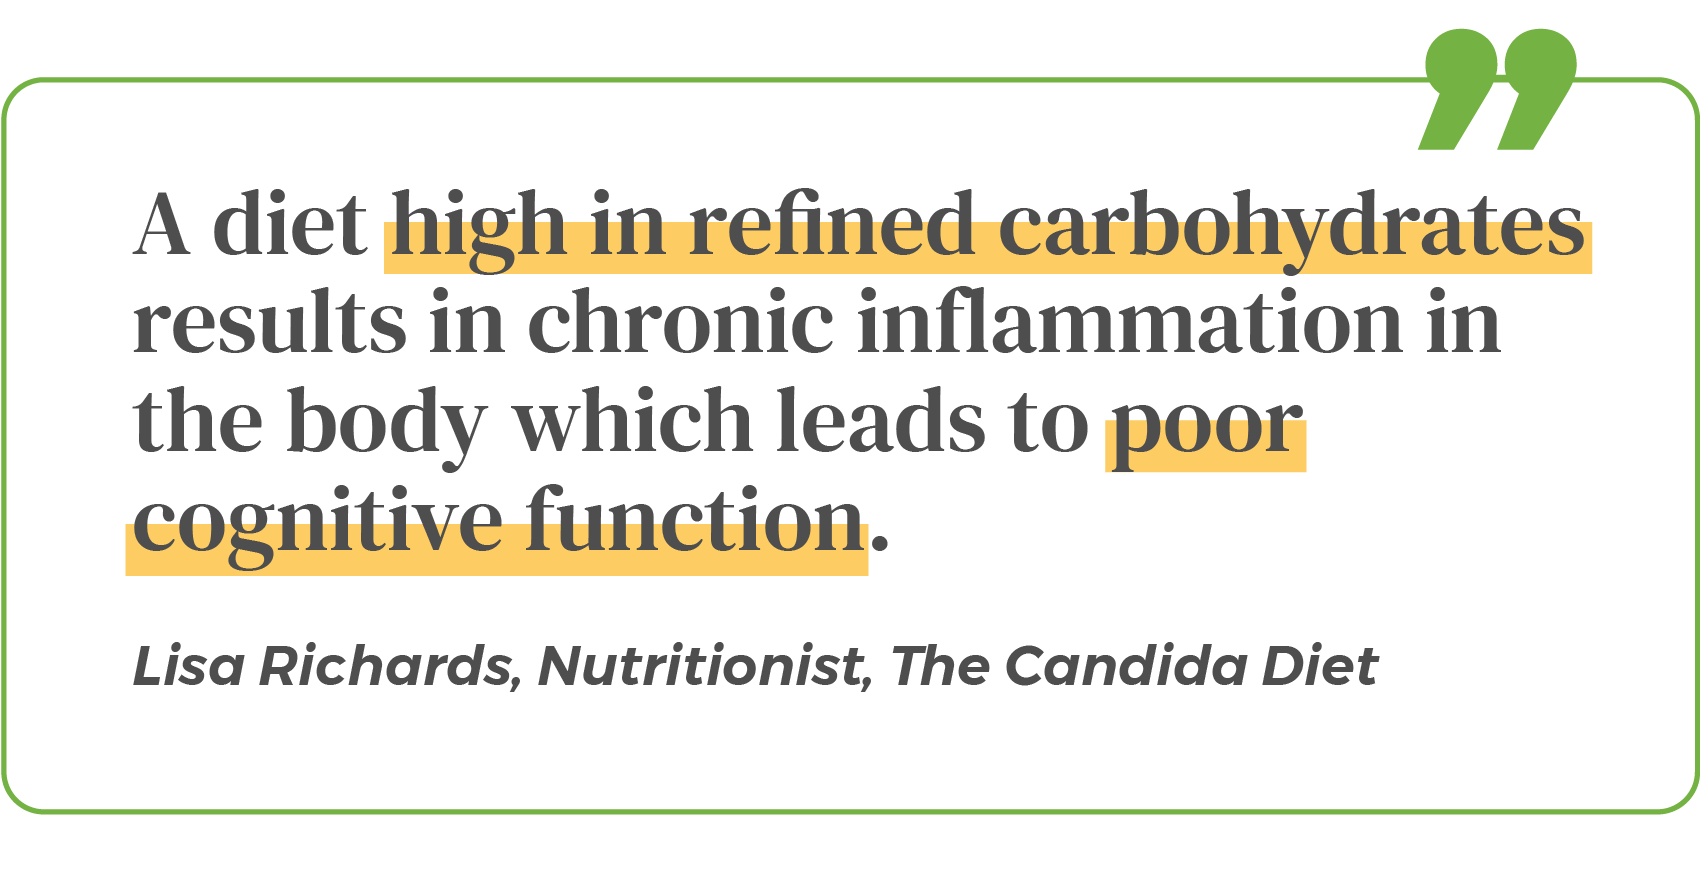 Diets with high carbohydrate content results in chronic inflammation.